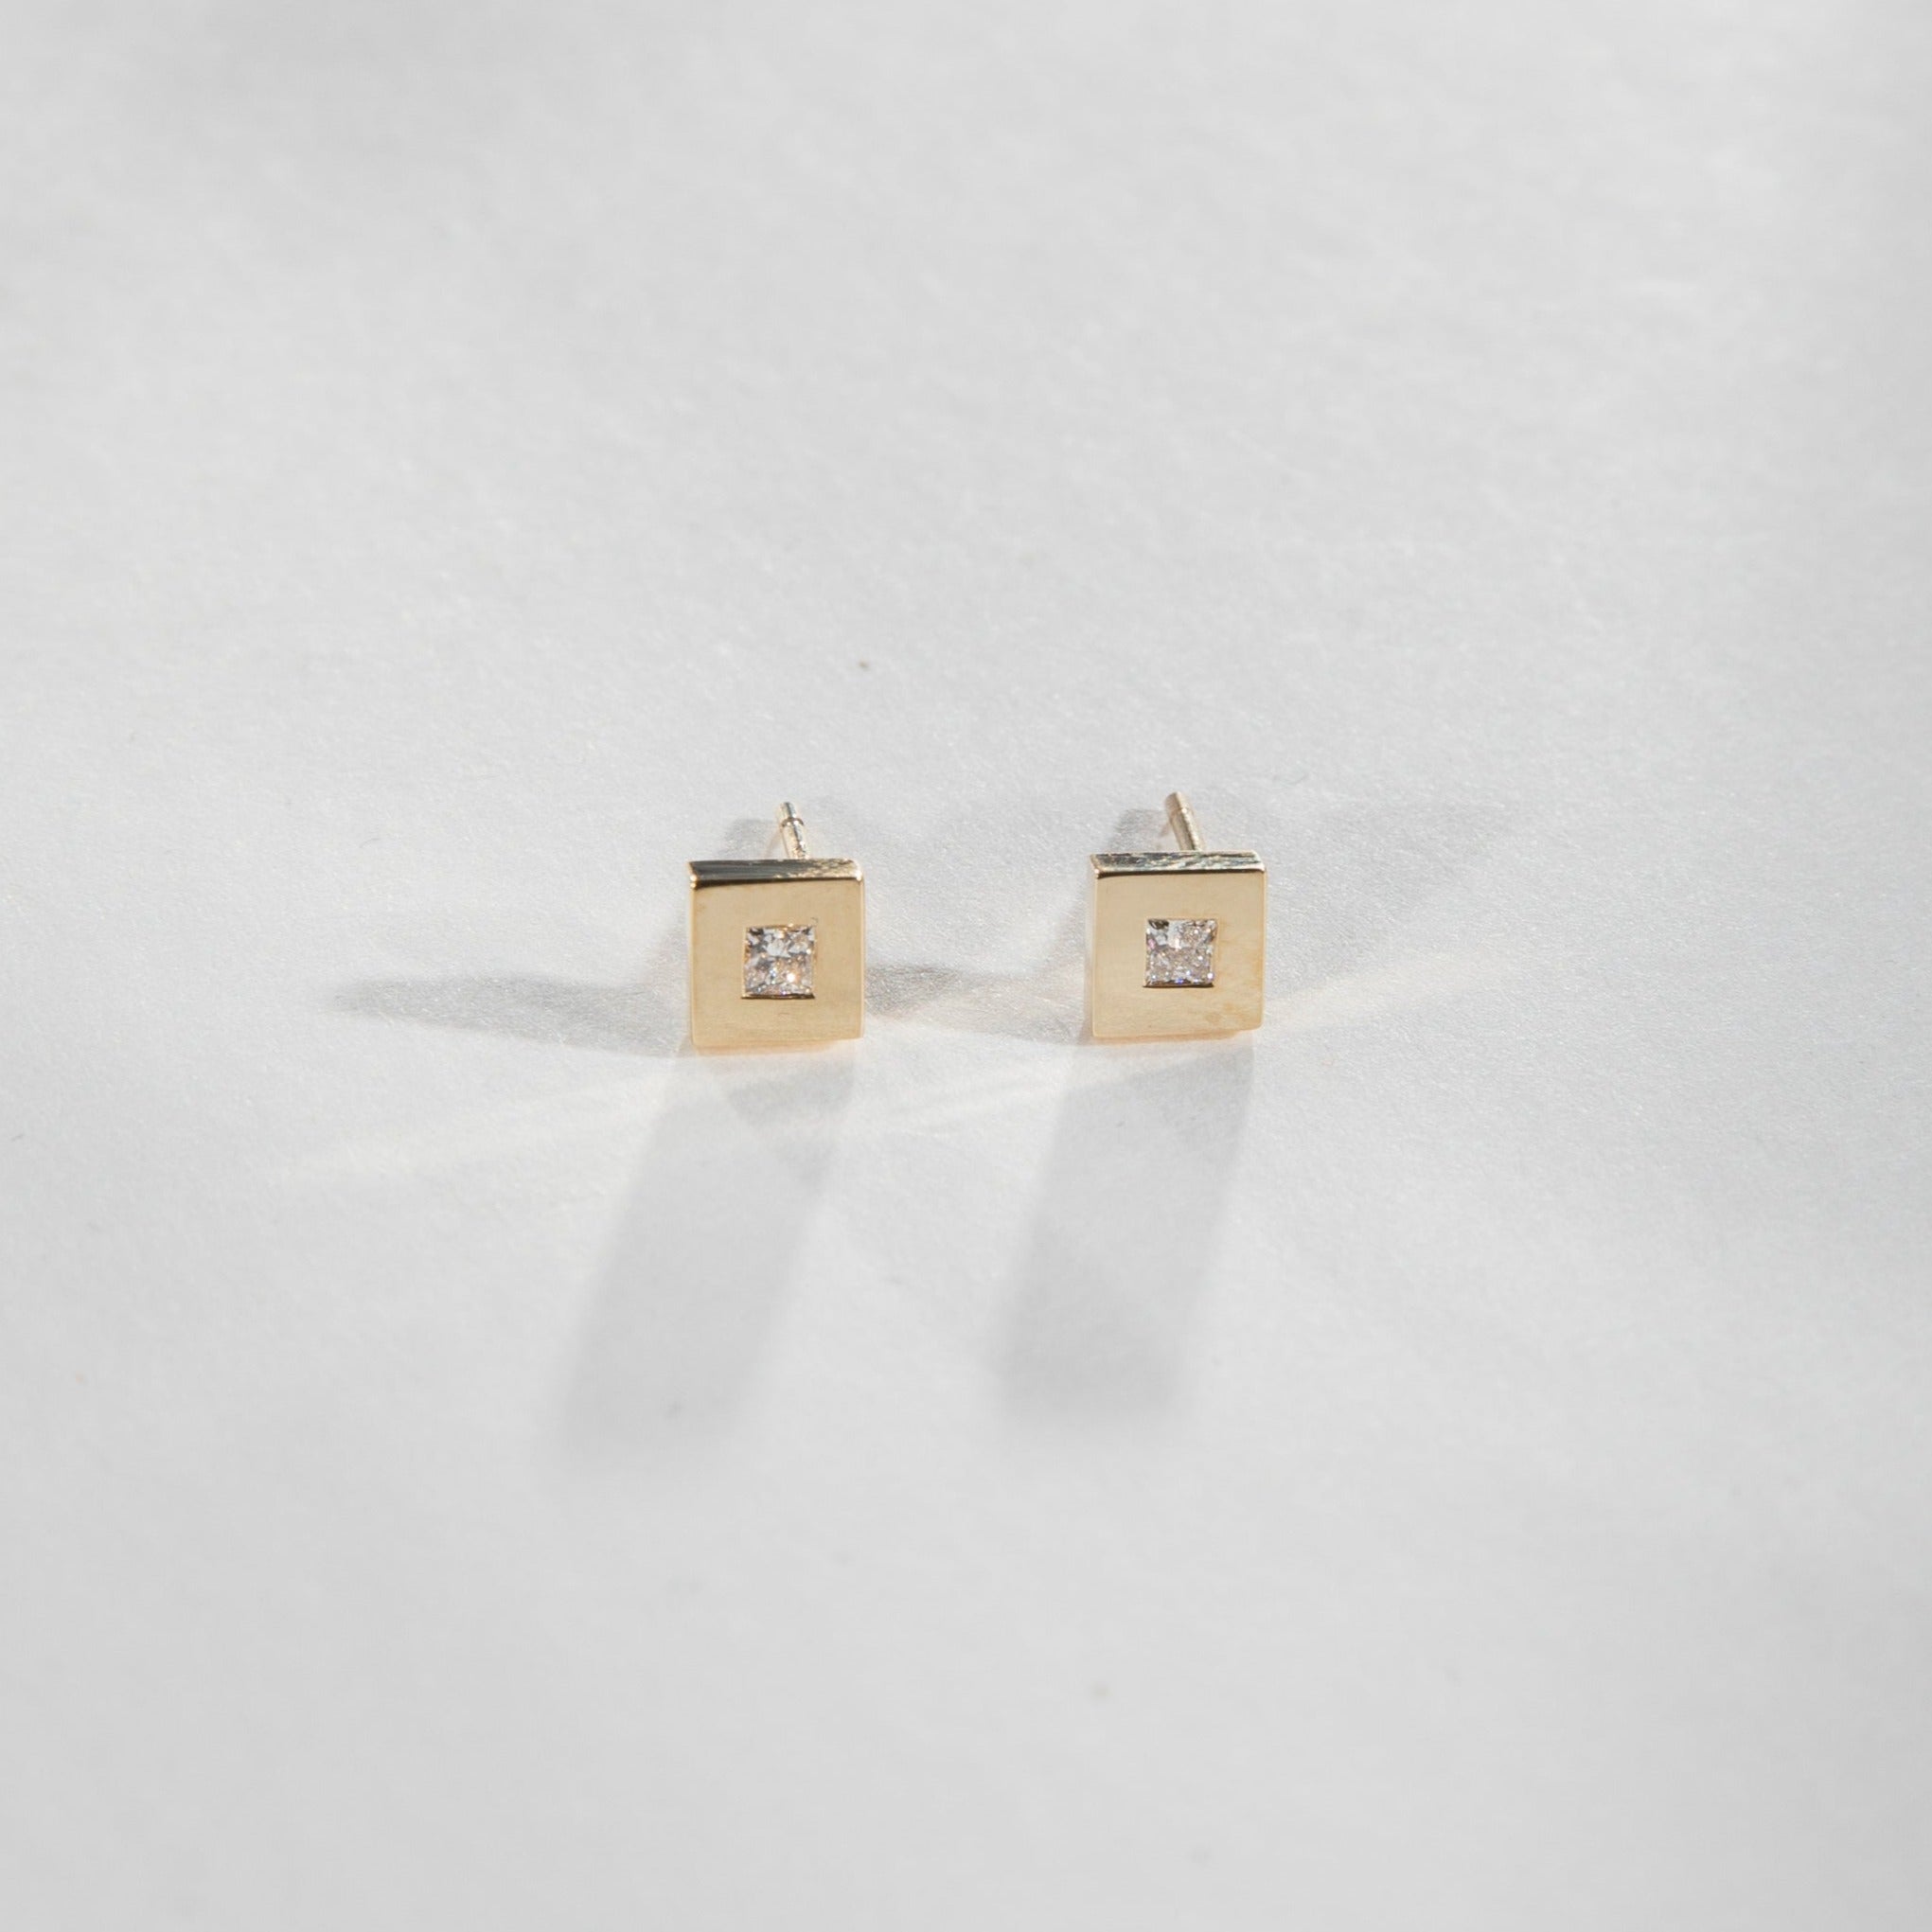 Sada Designer Earrings in 14k Gold set with lab-grown diamonds By SHW Fine Jewelry NYC